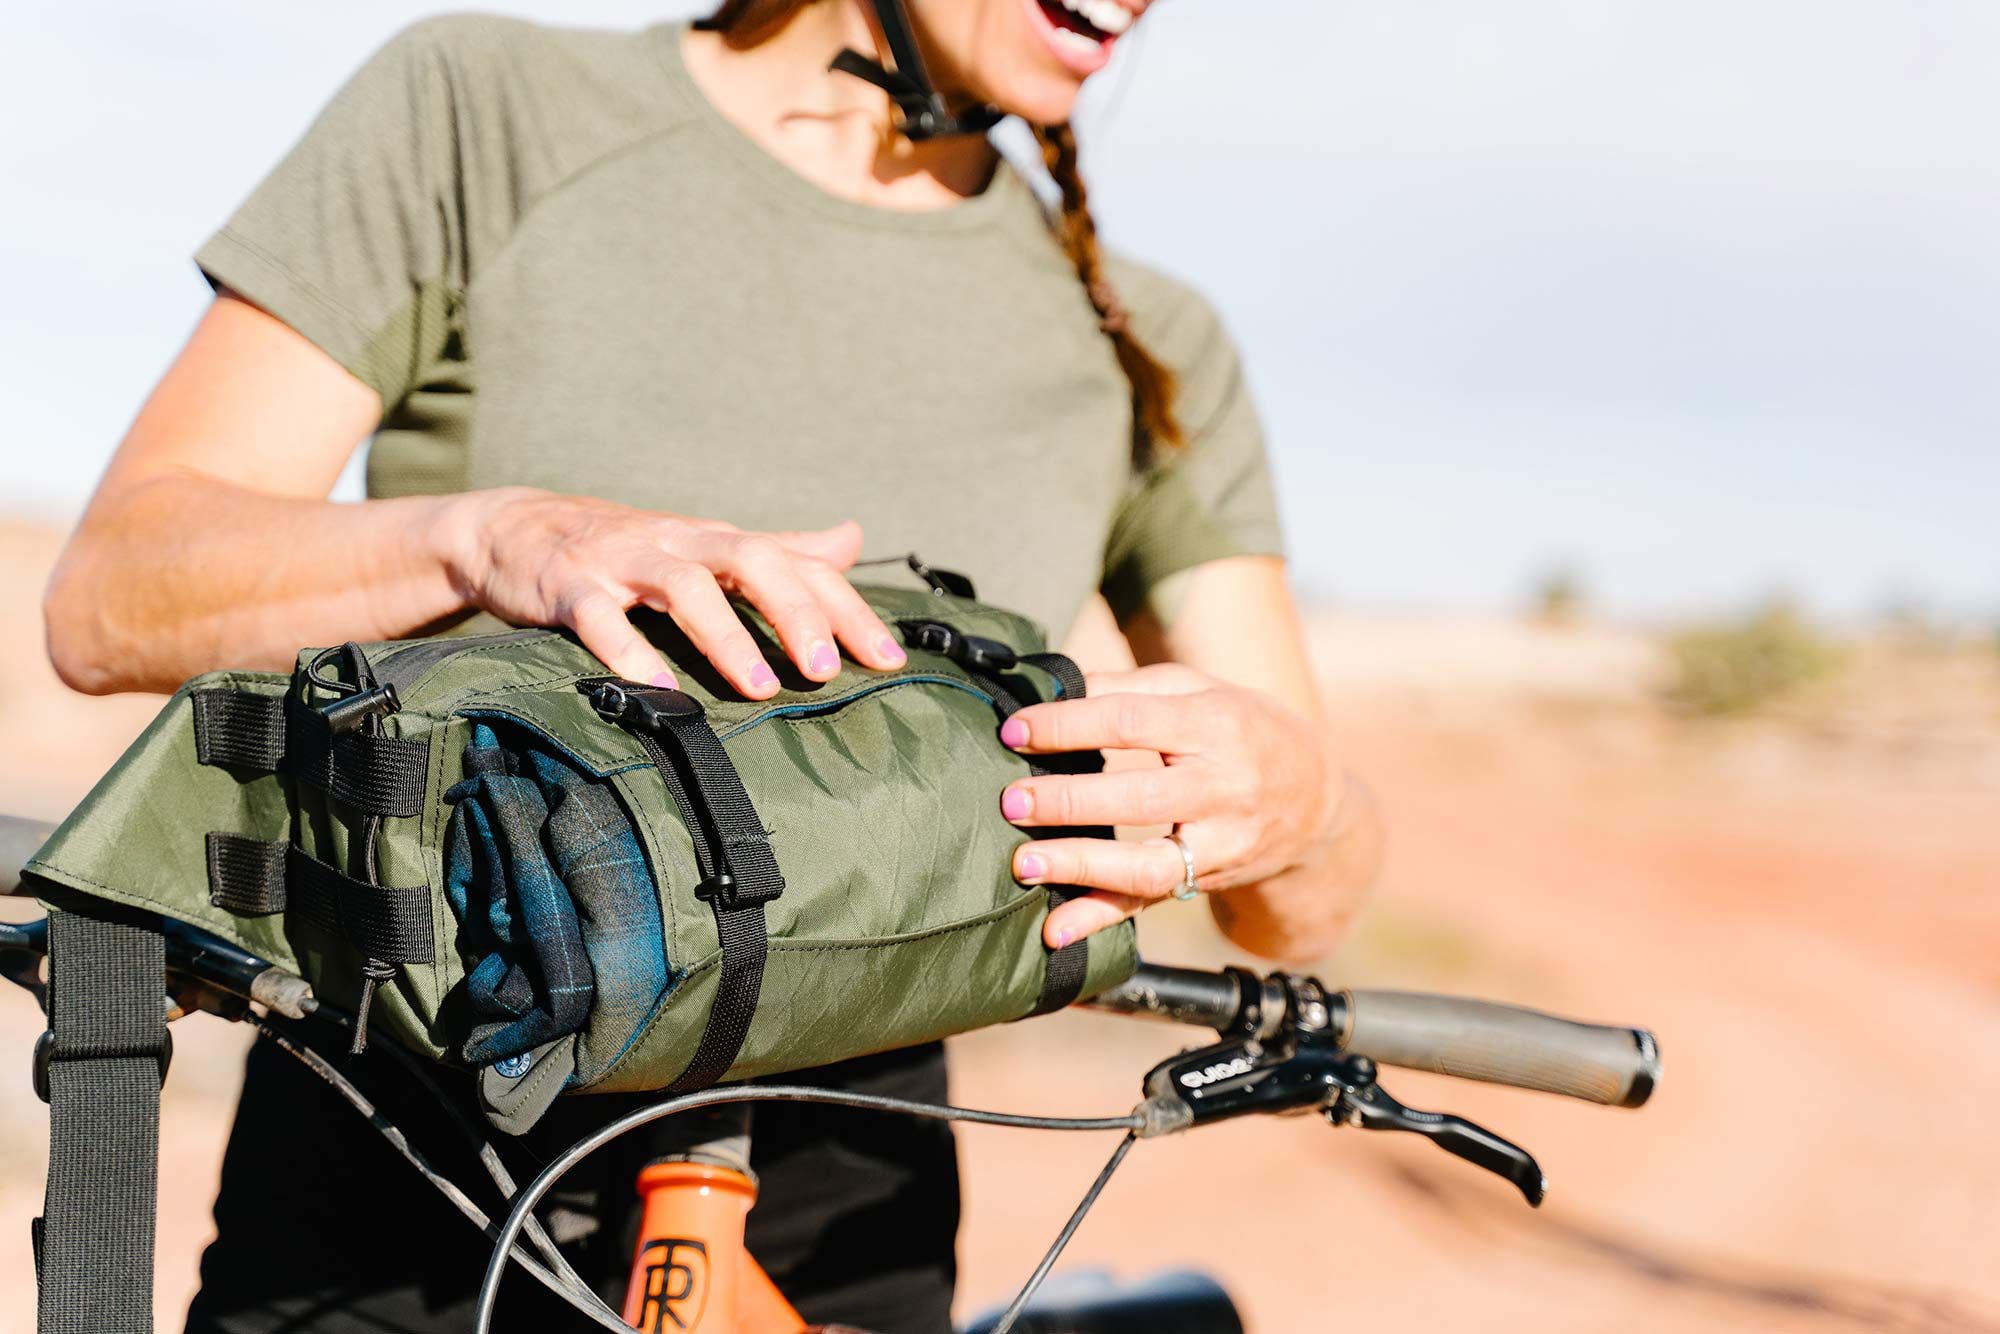 Swift X Kitsbow Anchor Hip Pack and Sidekick Stem Bag Review 